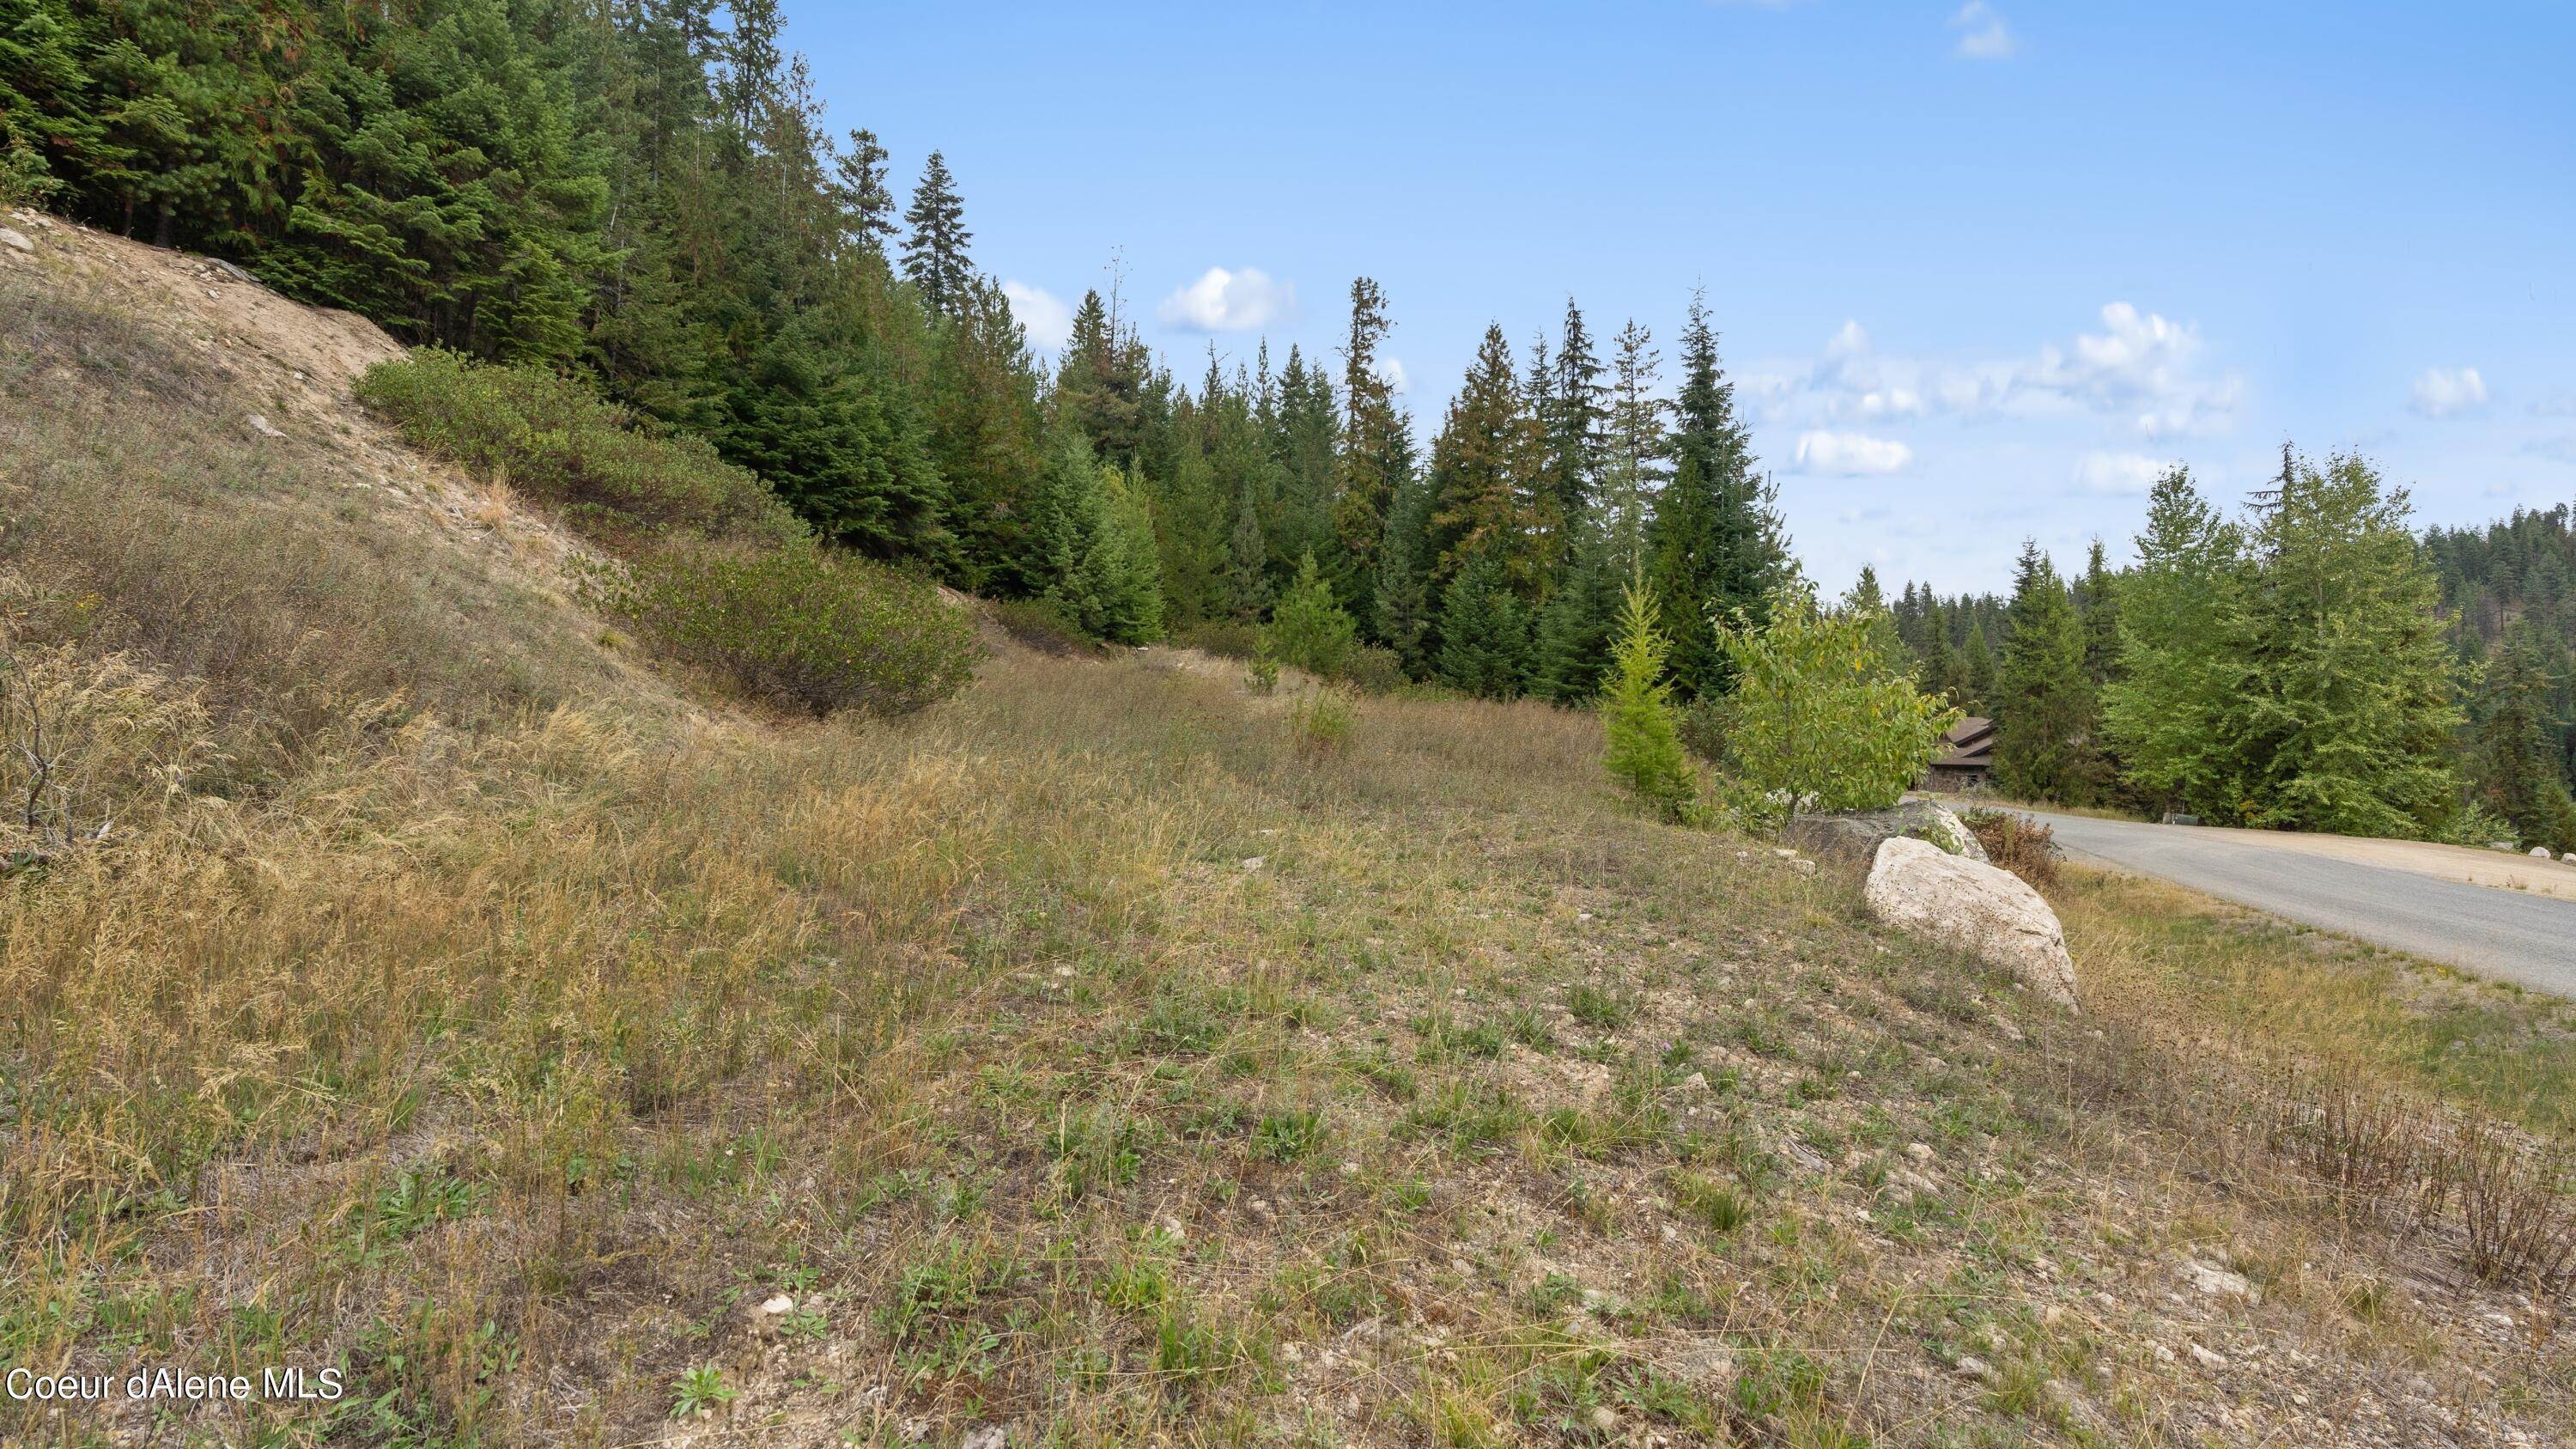 6. Land for Sale at Blk 13 Lots 1&2 Long Drive Priest Lake, Idaho 83856 United States